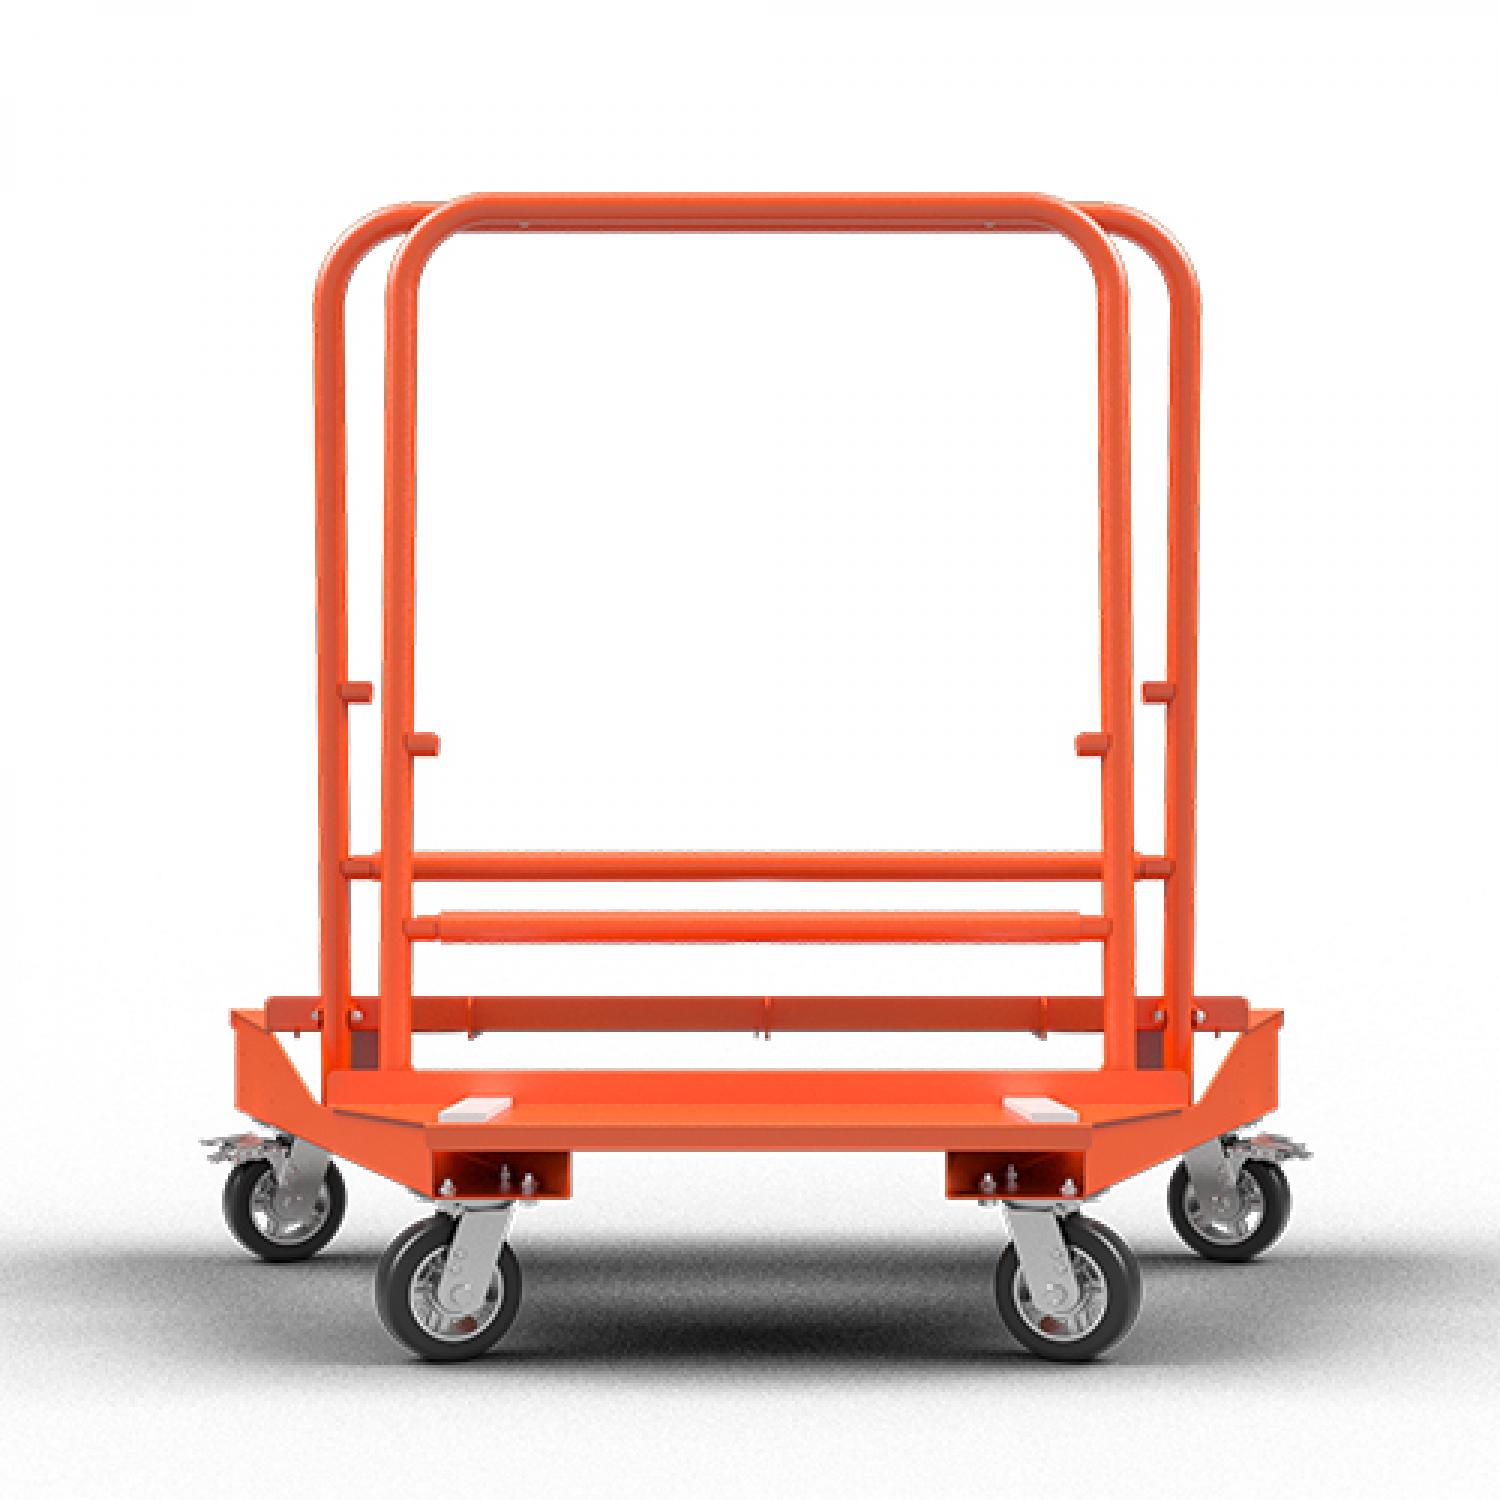 ABACO NESTING DUAL DRYWALL CART 049 - ANDWC049